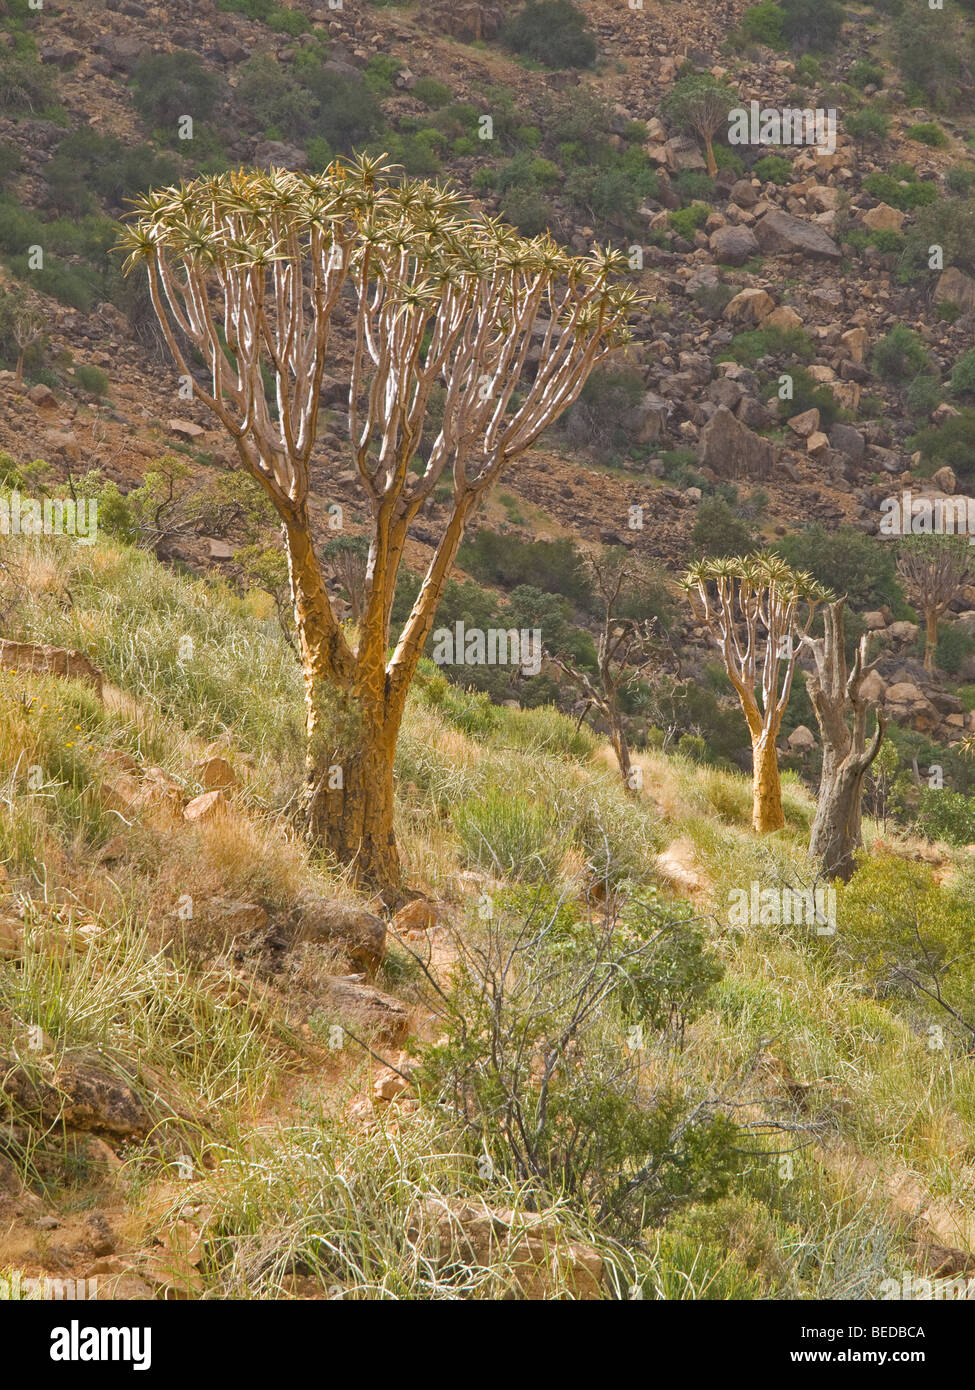 Quiver Tree (ALOE) dichtoma, Naukluft mountains, Namibie, Afrique Banque D'Images